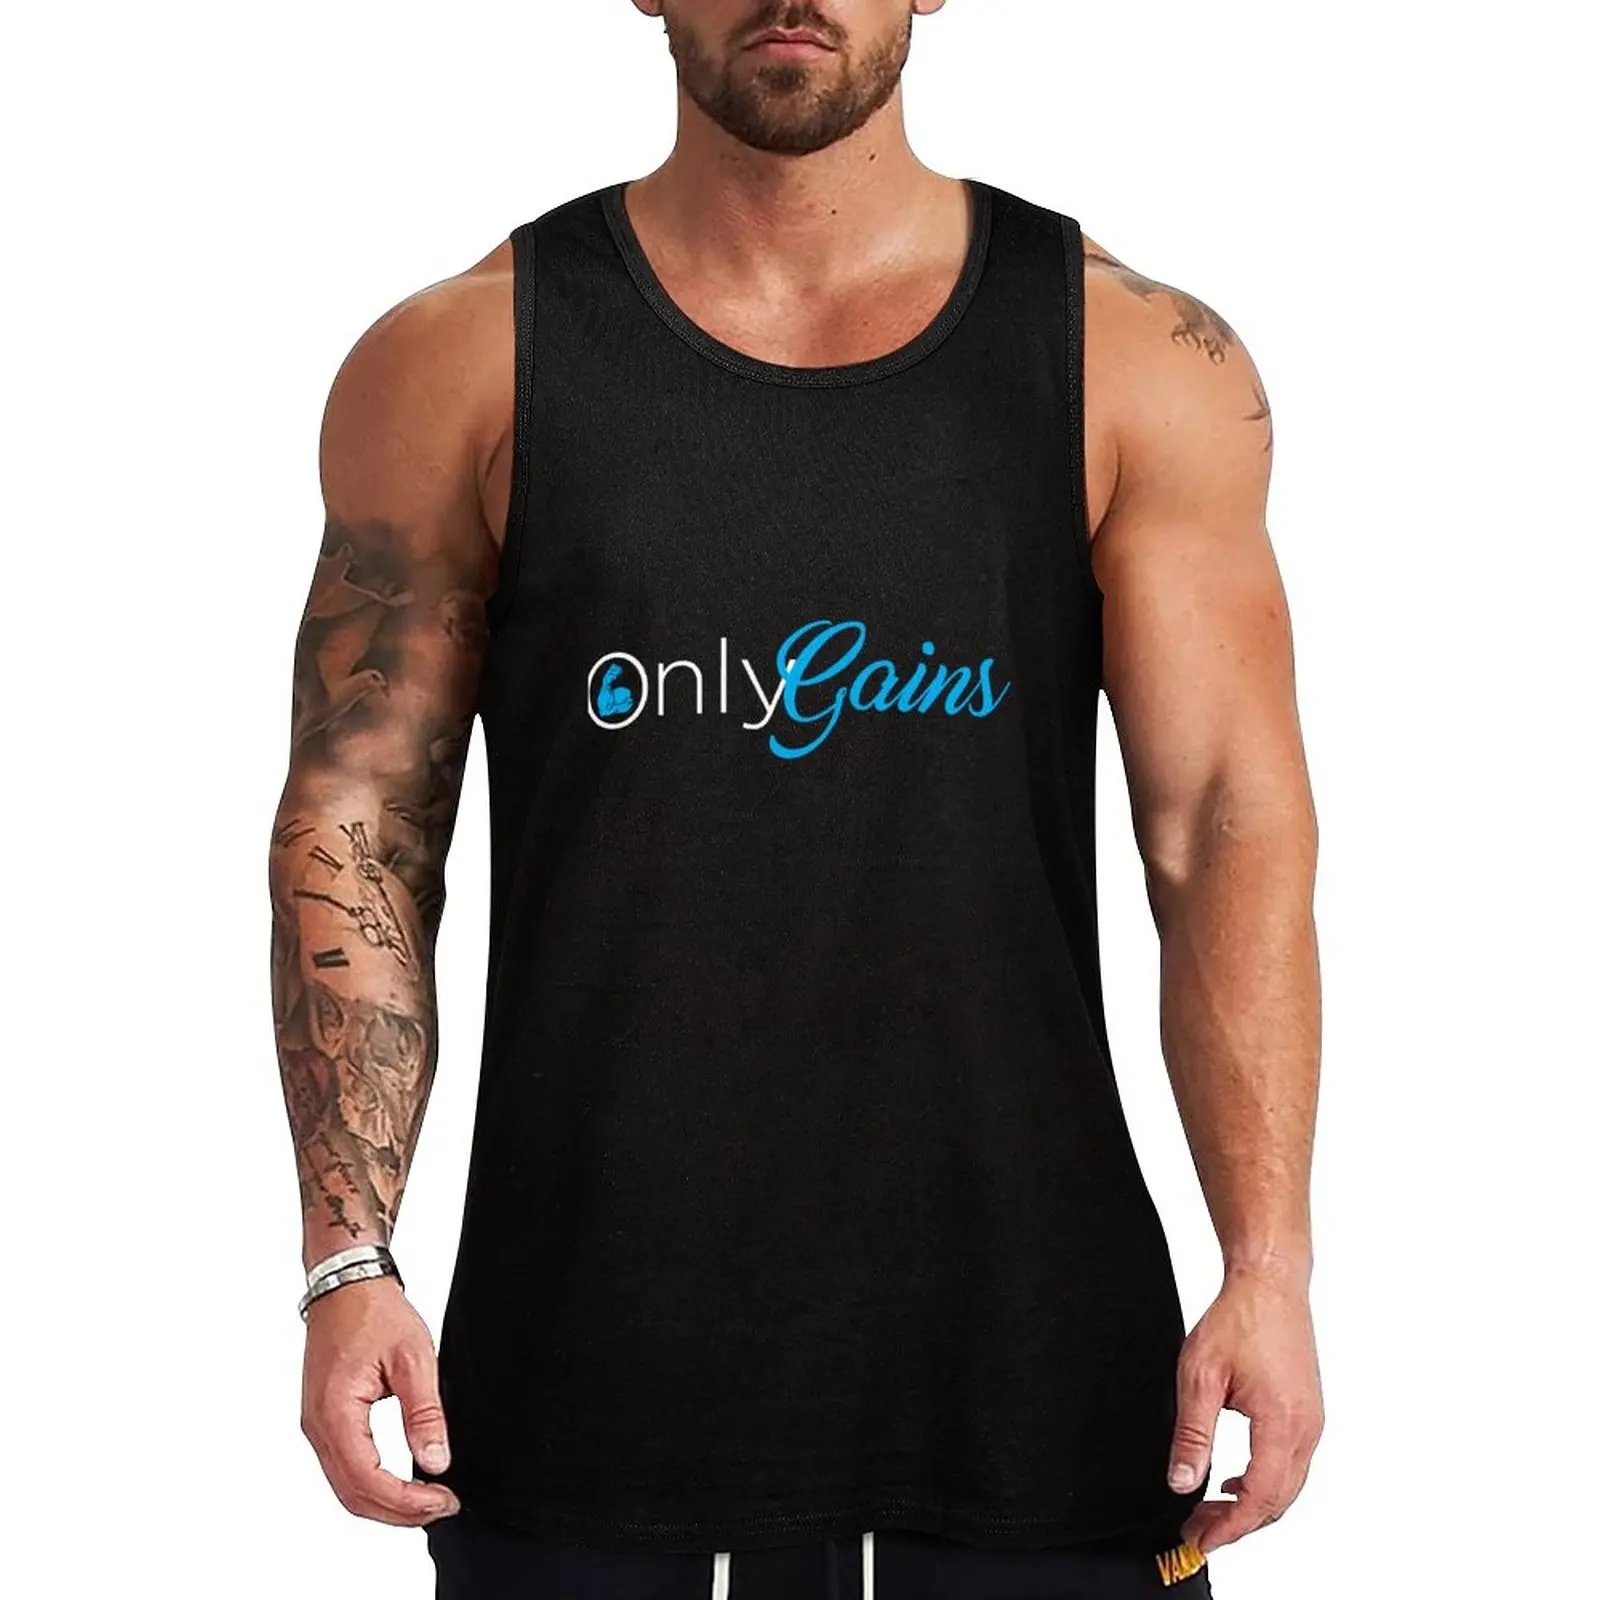 

New only gains gym Tank Top sports clothes for men Men's clothing brands gym wear men fashion 2023 man